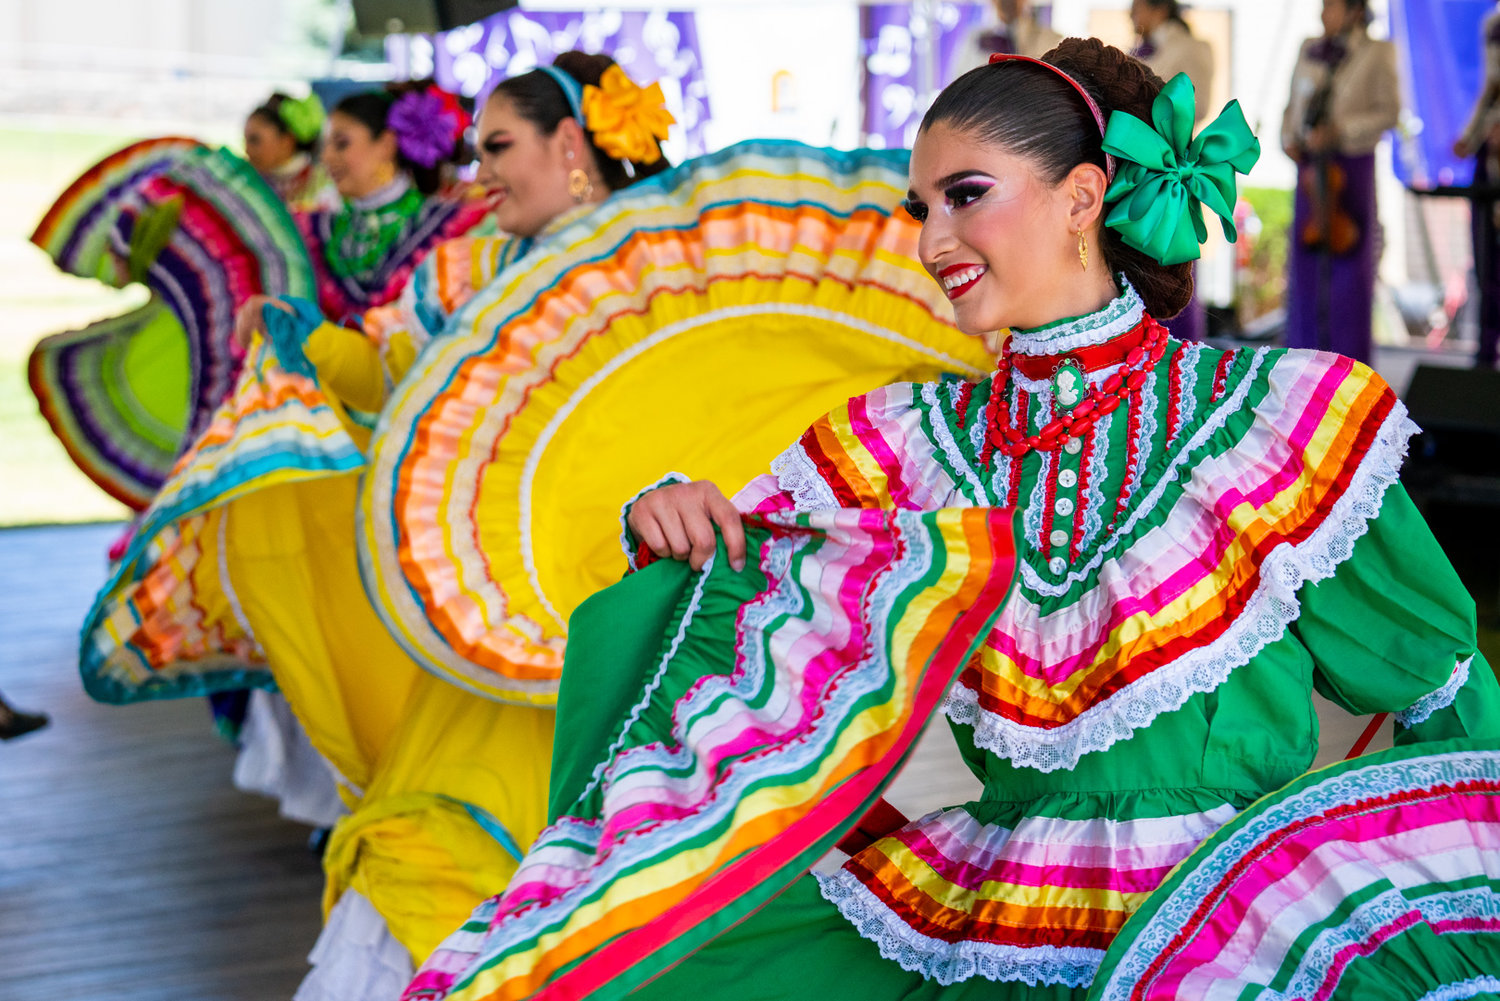 Ballet folklorico performers share their traditions during the 2019 edition of ¡Fiesta Latina! This year, the four-day cultural event will run June 16-19 at Western New Mexico University.